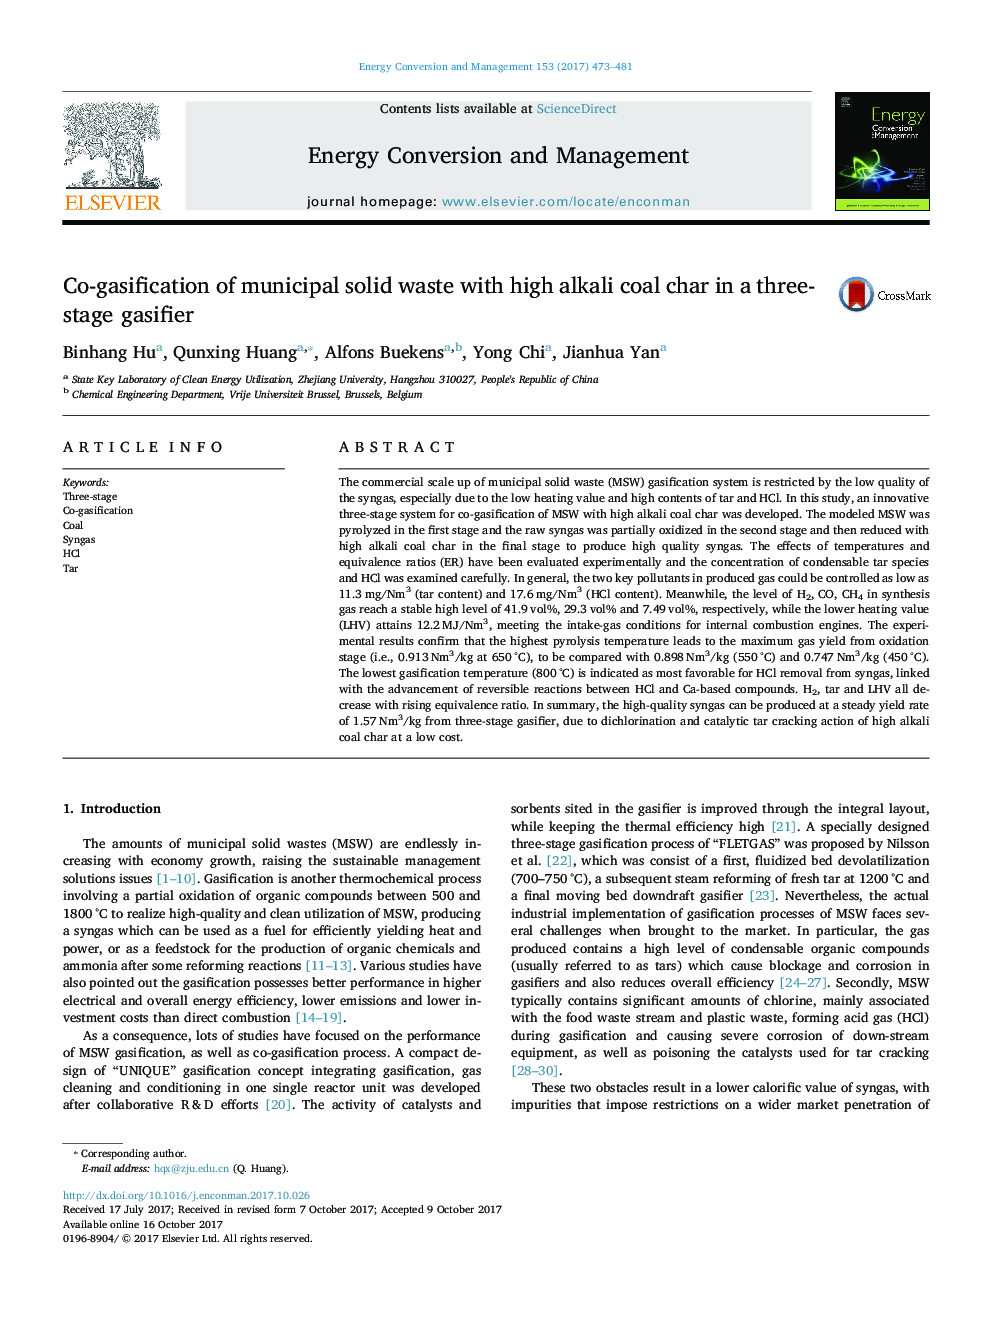 Co-gasification of municipal solid waste with high alkali coal char in a three-stage gasifier